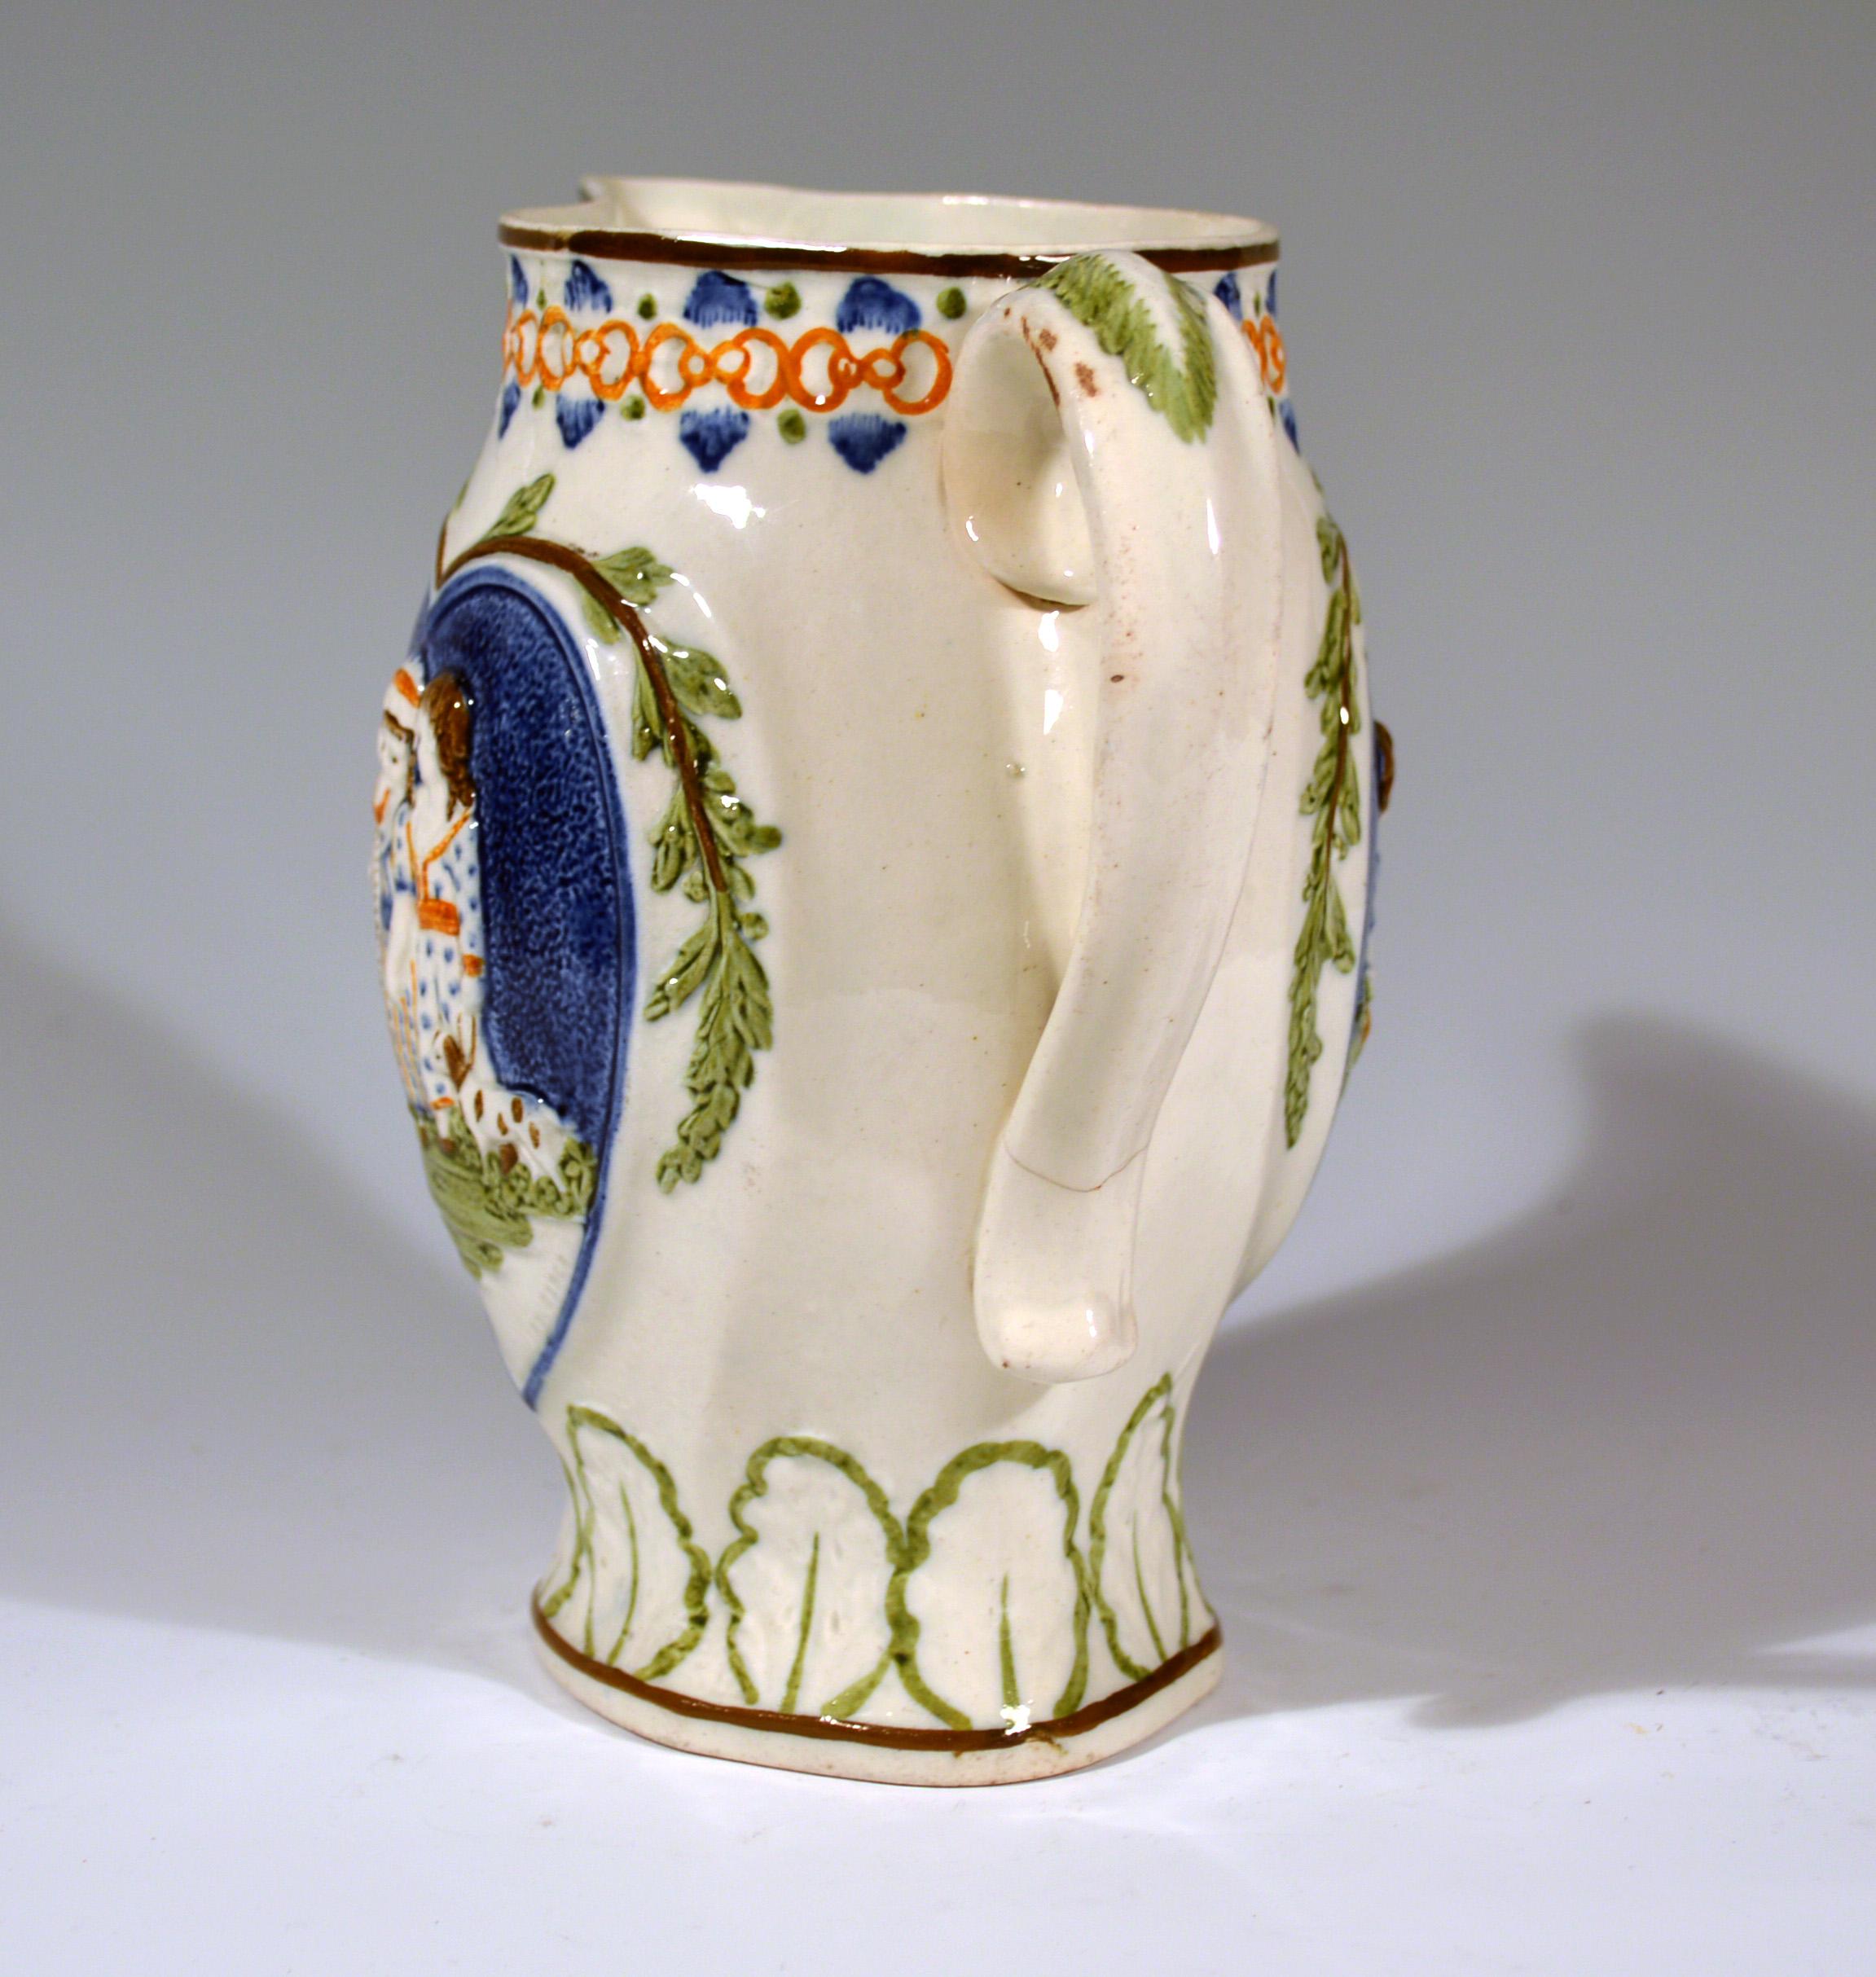 19th Century Prattware Pearlware Jug with Children with Heart-Shaped Panels, 1810-1820